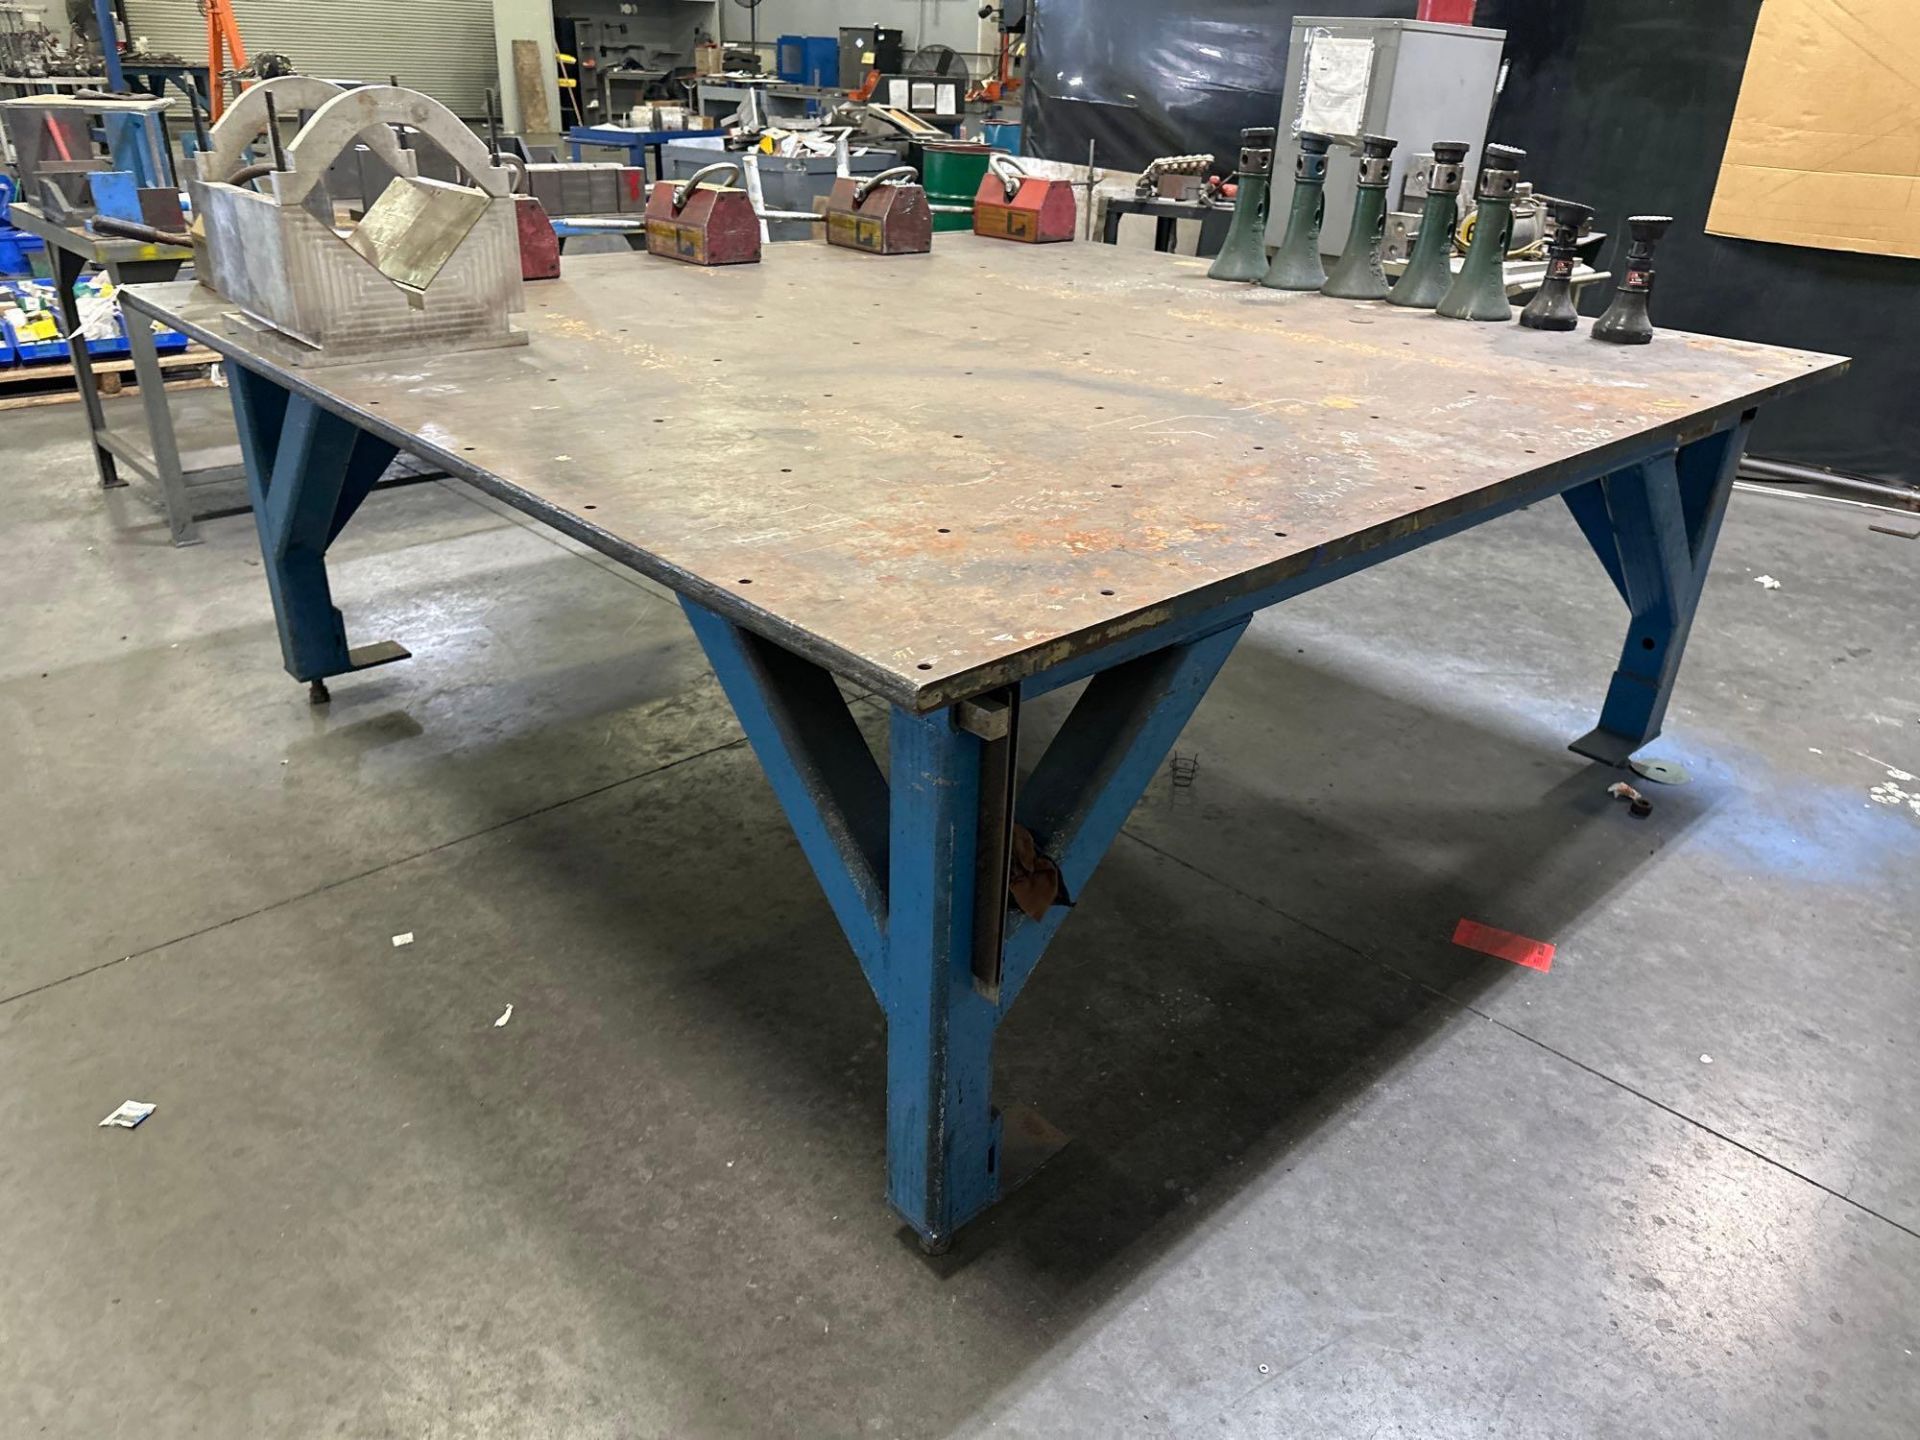 96”L x 99”W x 36”H Steel Welding Table *CONTENTS NOT INCLUDED. TABLE ONLY* - Image 3 of 4